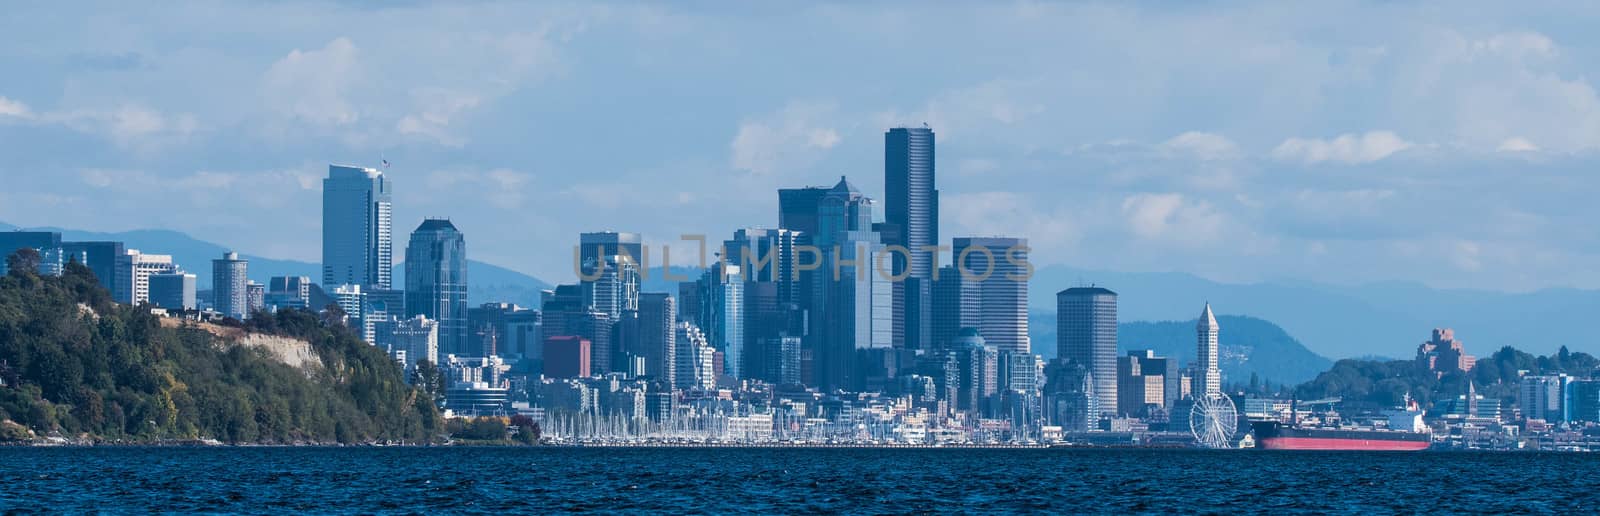 View of Seattle from Magnolia, taken from boat with Magnolia Bluff to the left and Smith Tower to the right